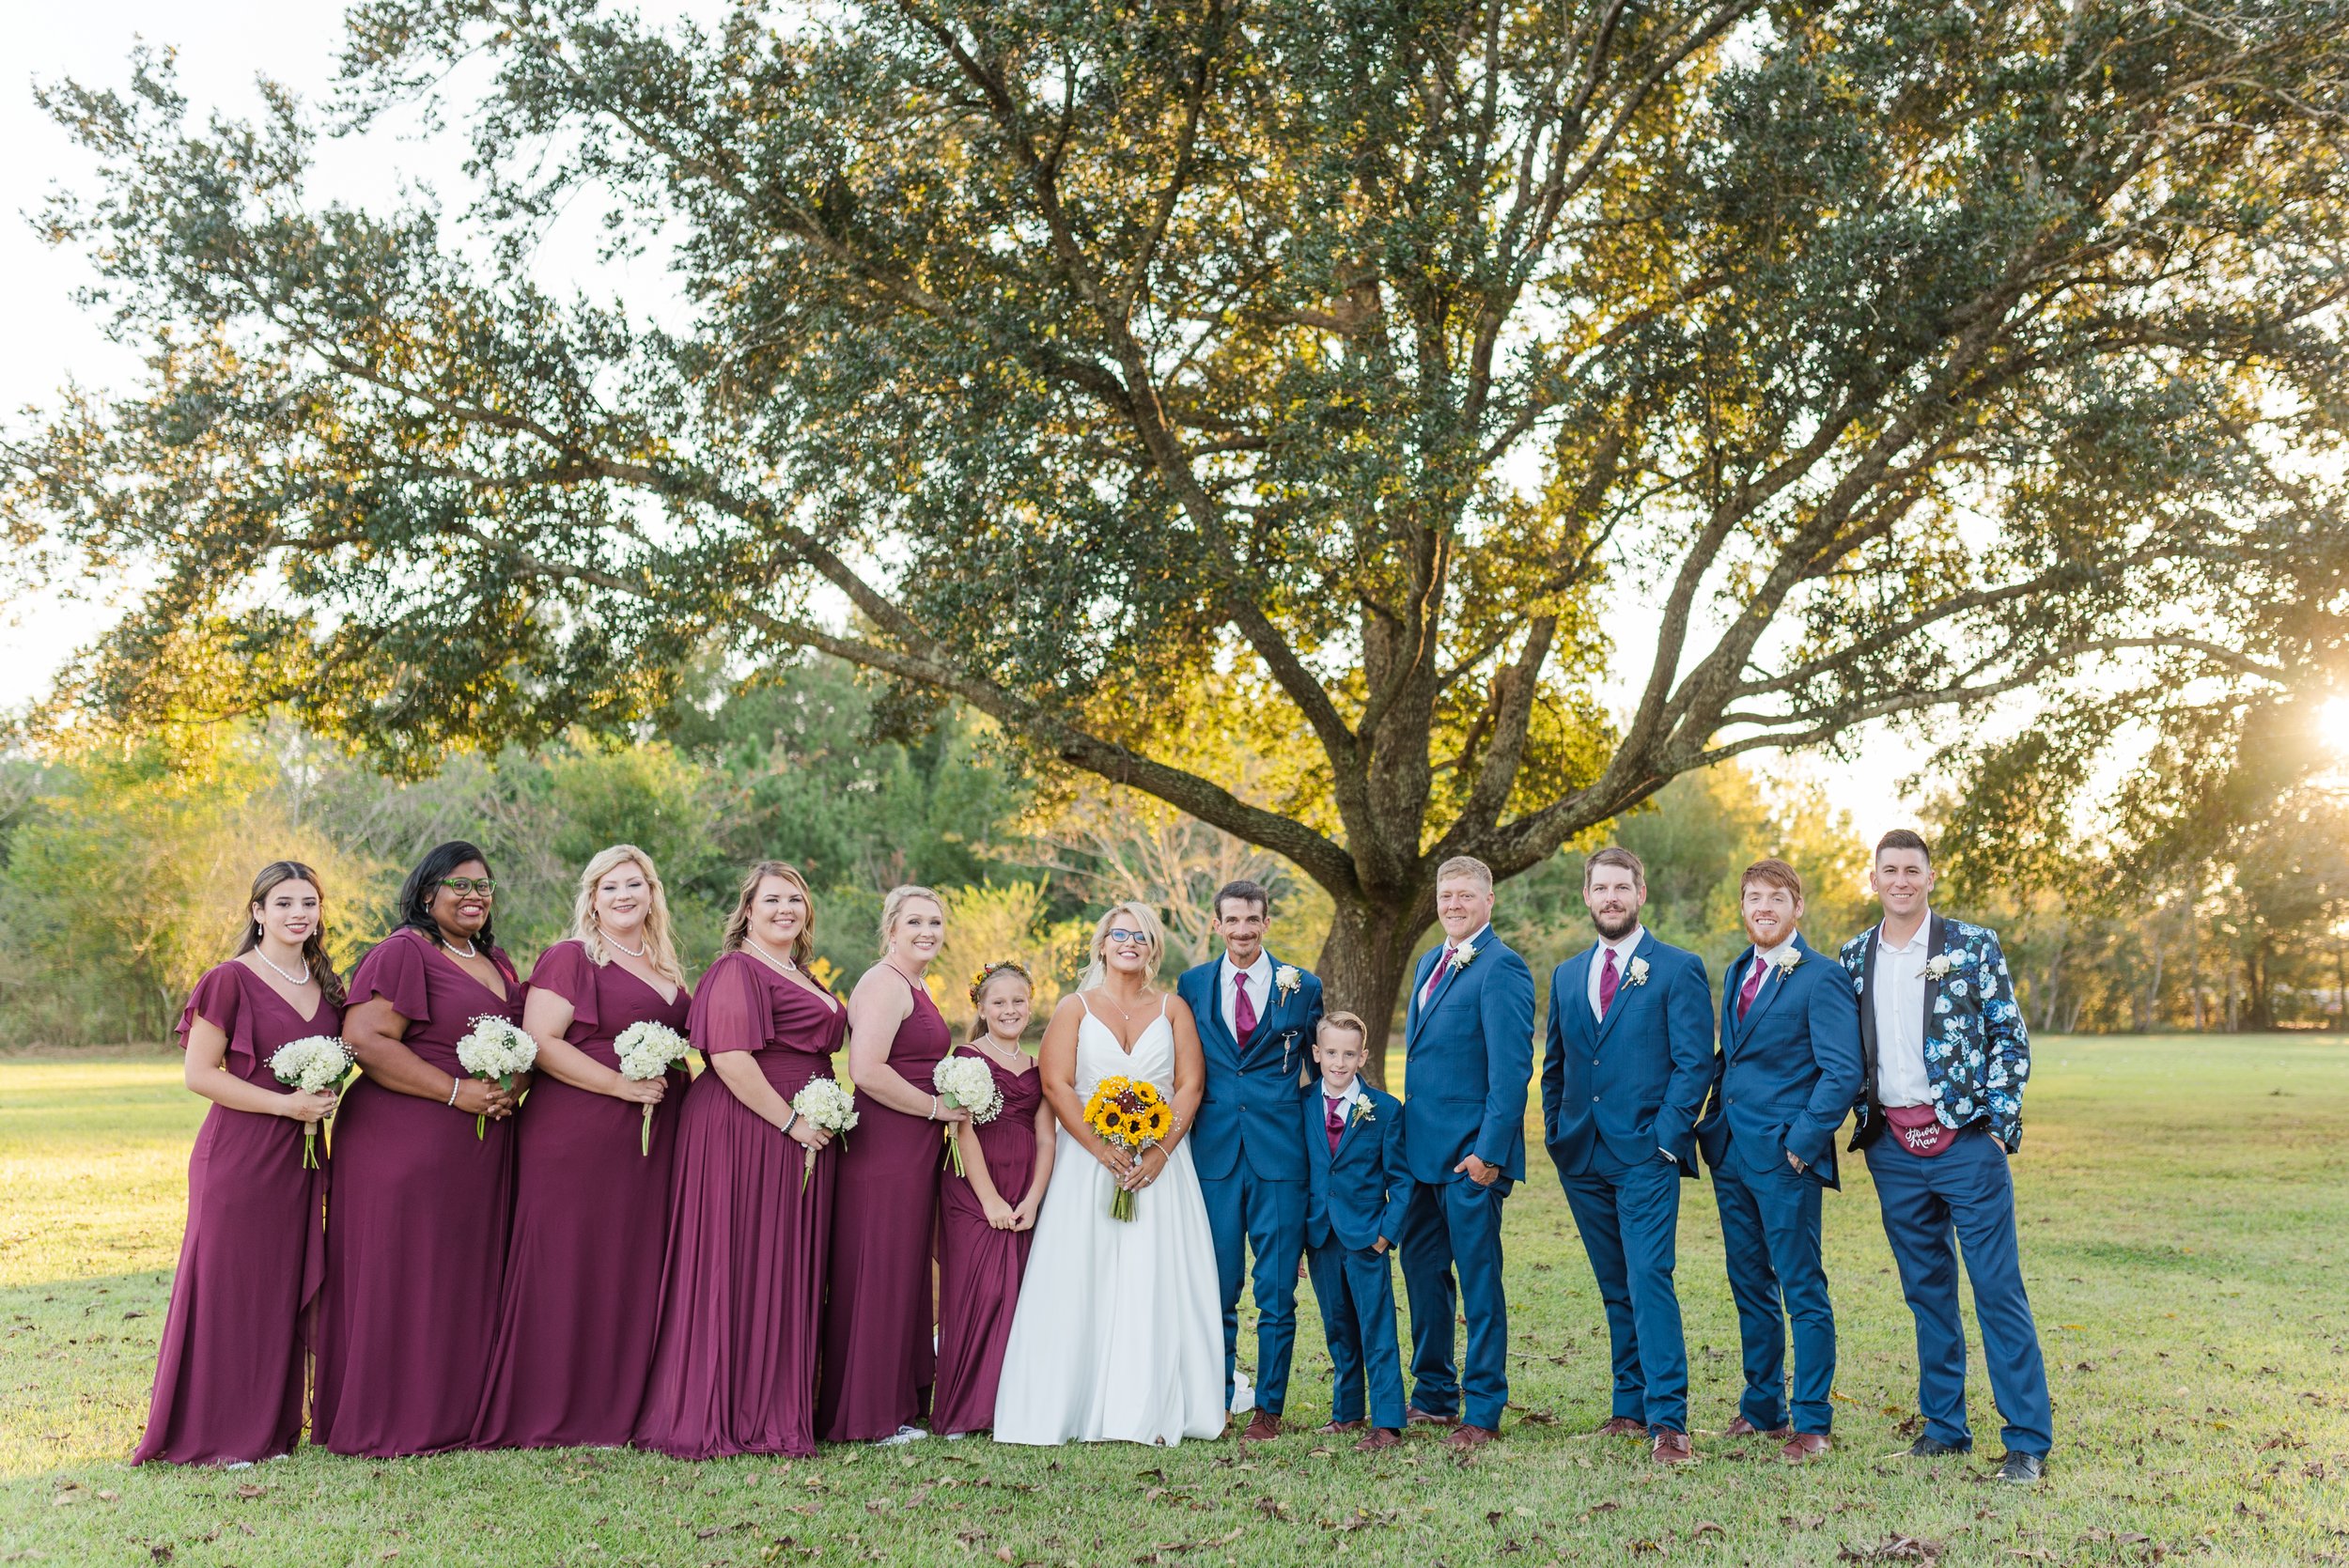 Intimate Fall Back / Front Yard Wedding in Mobile Alabama in October Photographed by Kristen Marcus Photography